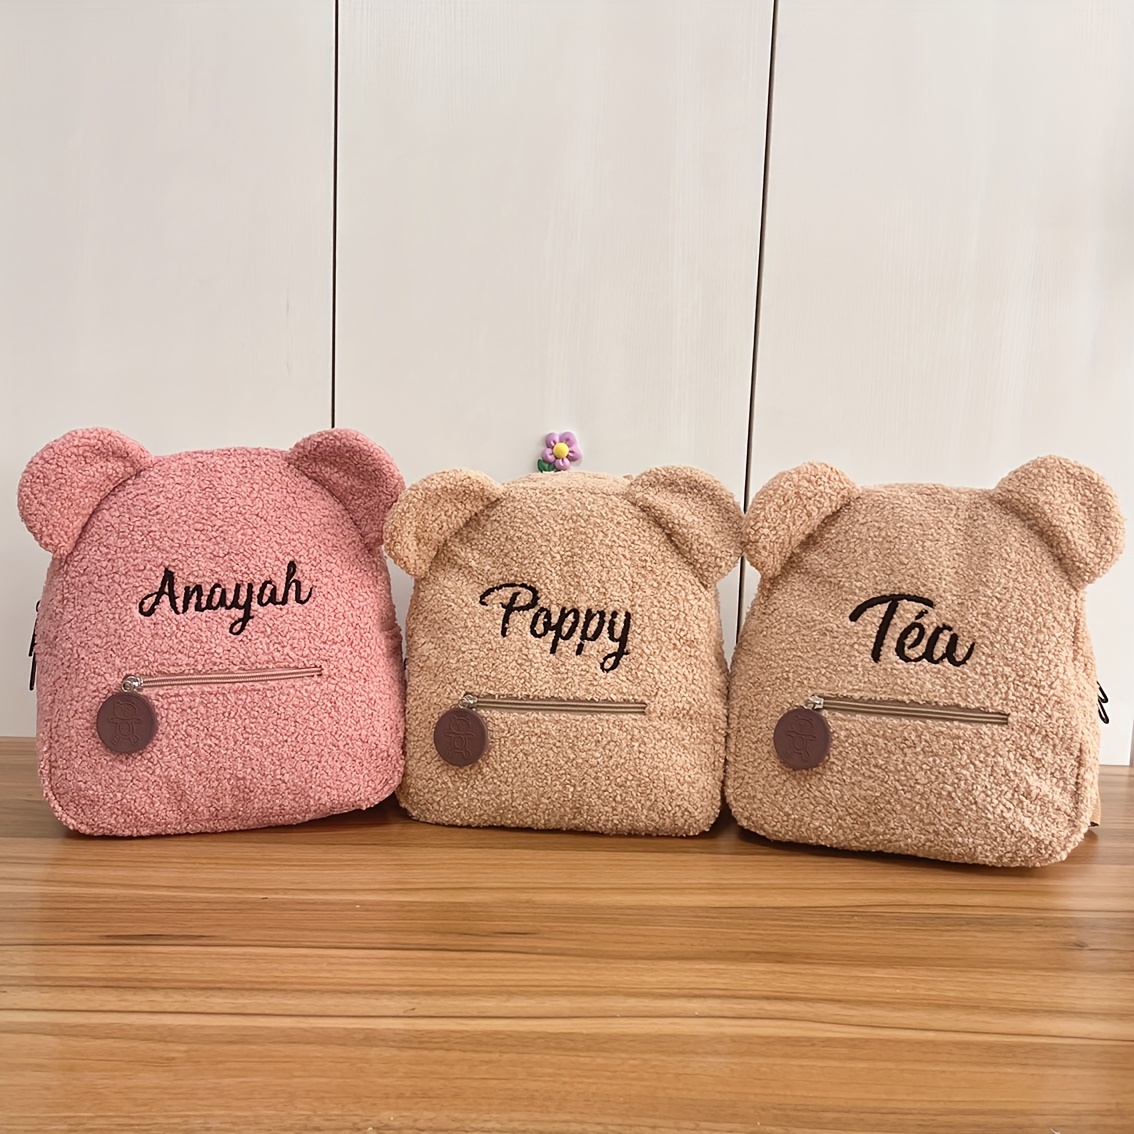 

Customized Personalized Embroidered Name Lightweight Backpack, Cute Plush Teddy Bear Design Backpack With Adjustable Straps